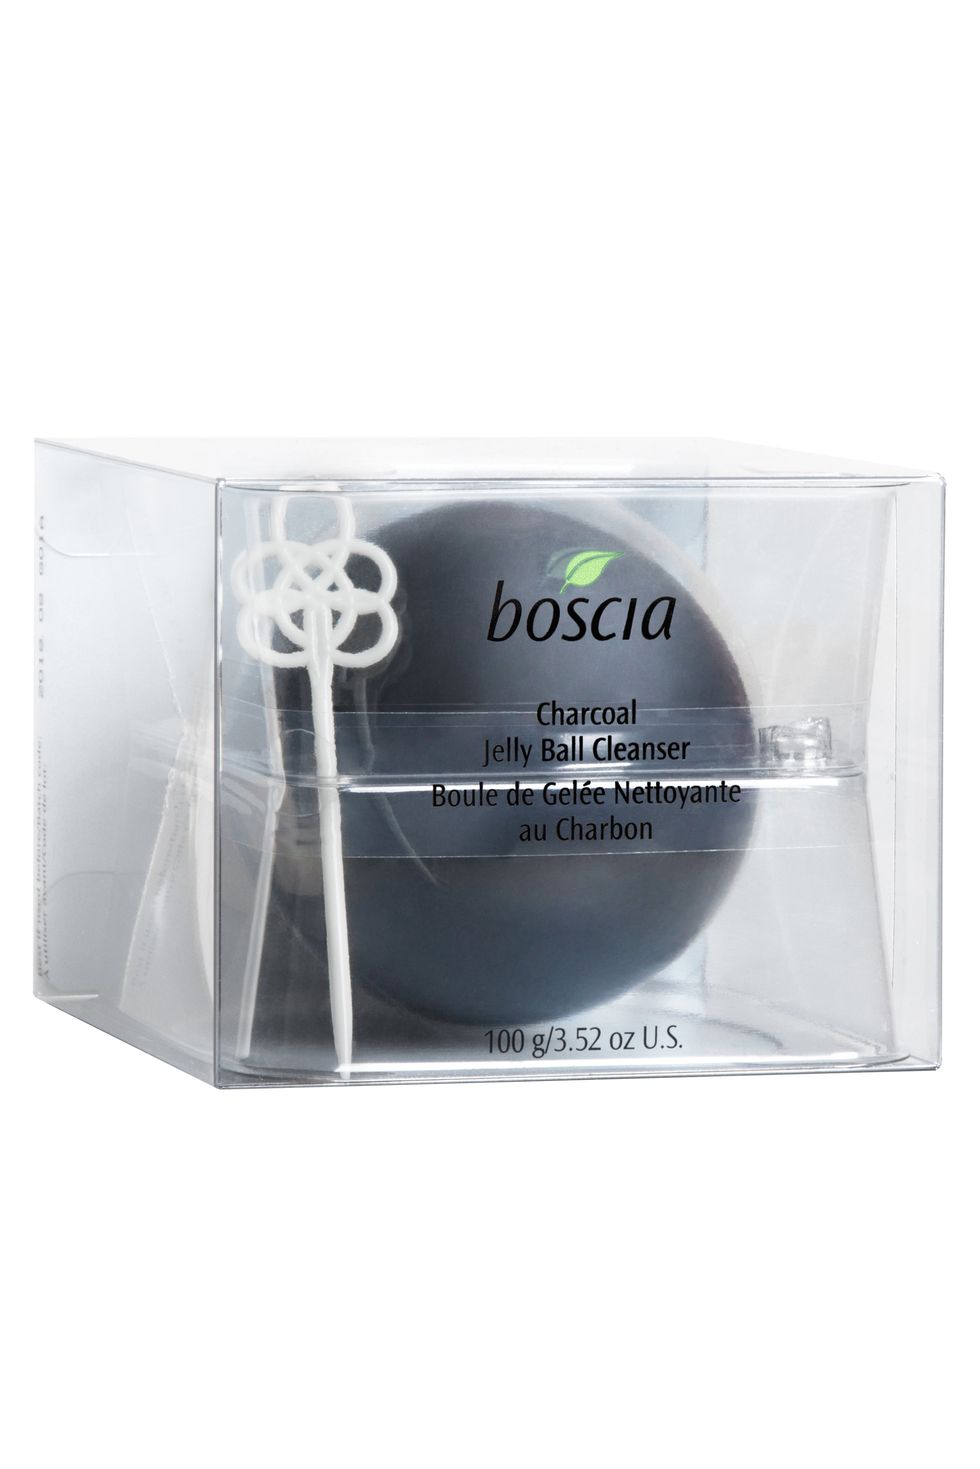 Charcoal Jelly Ball Cleanser